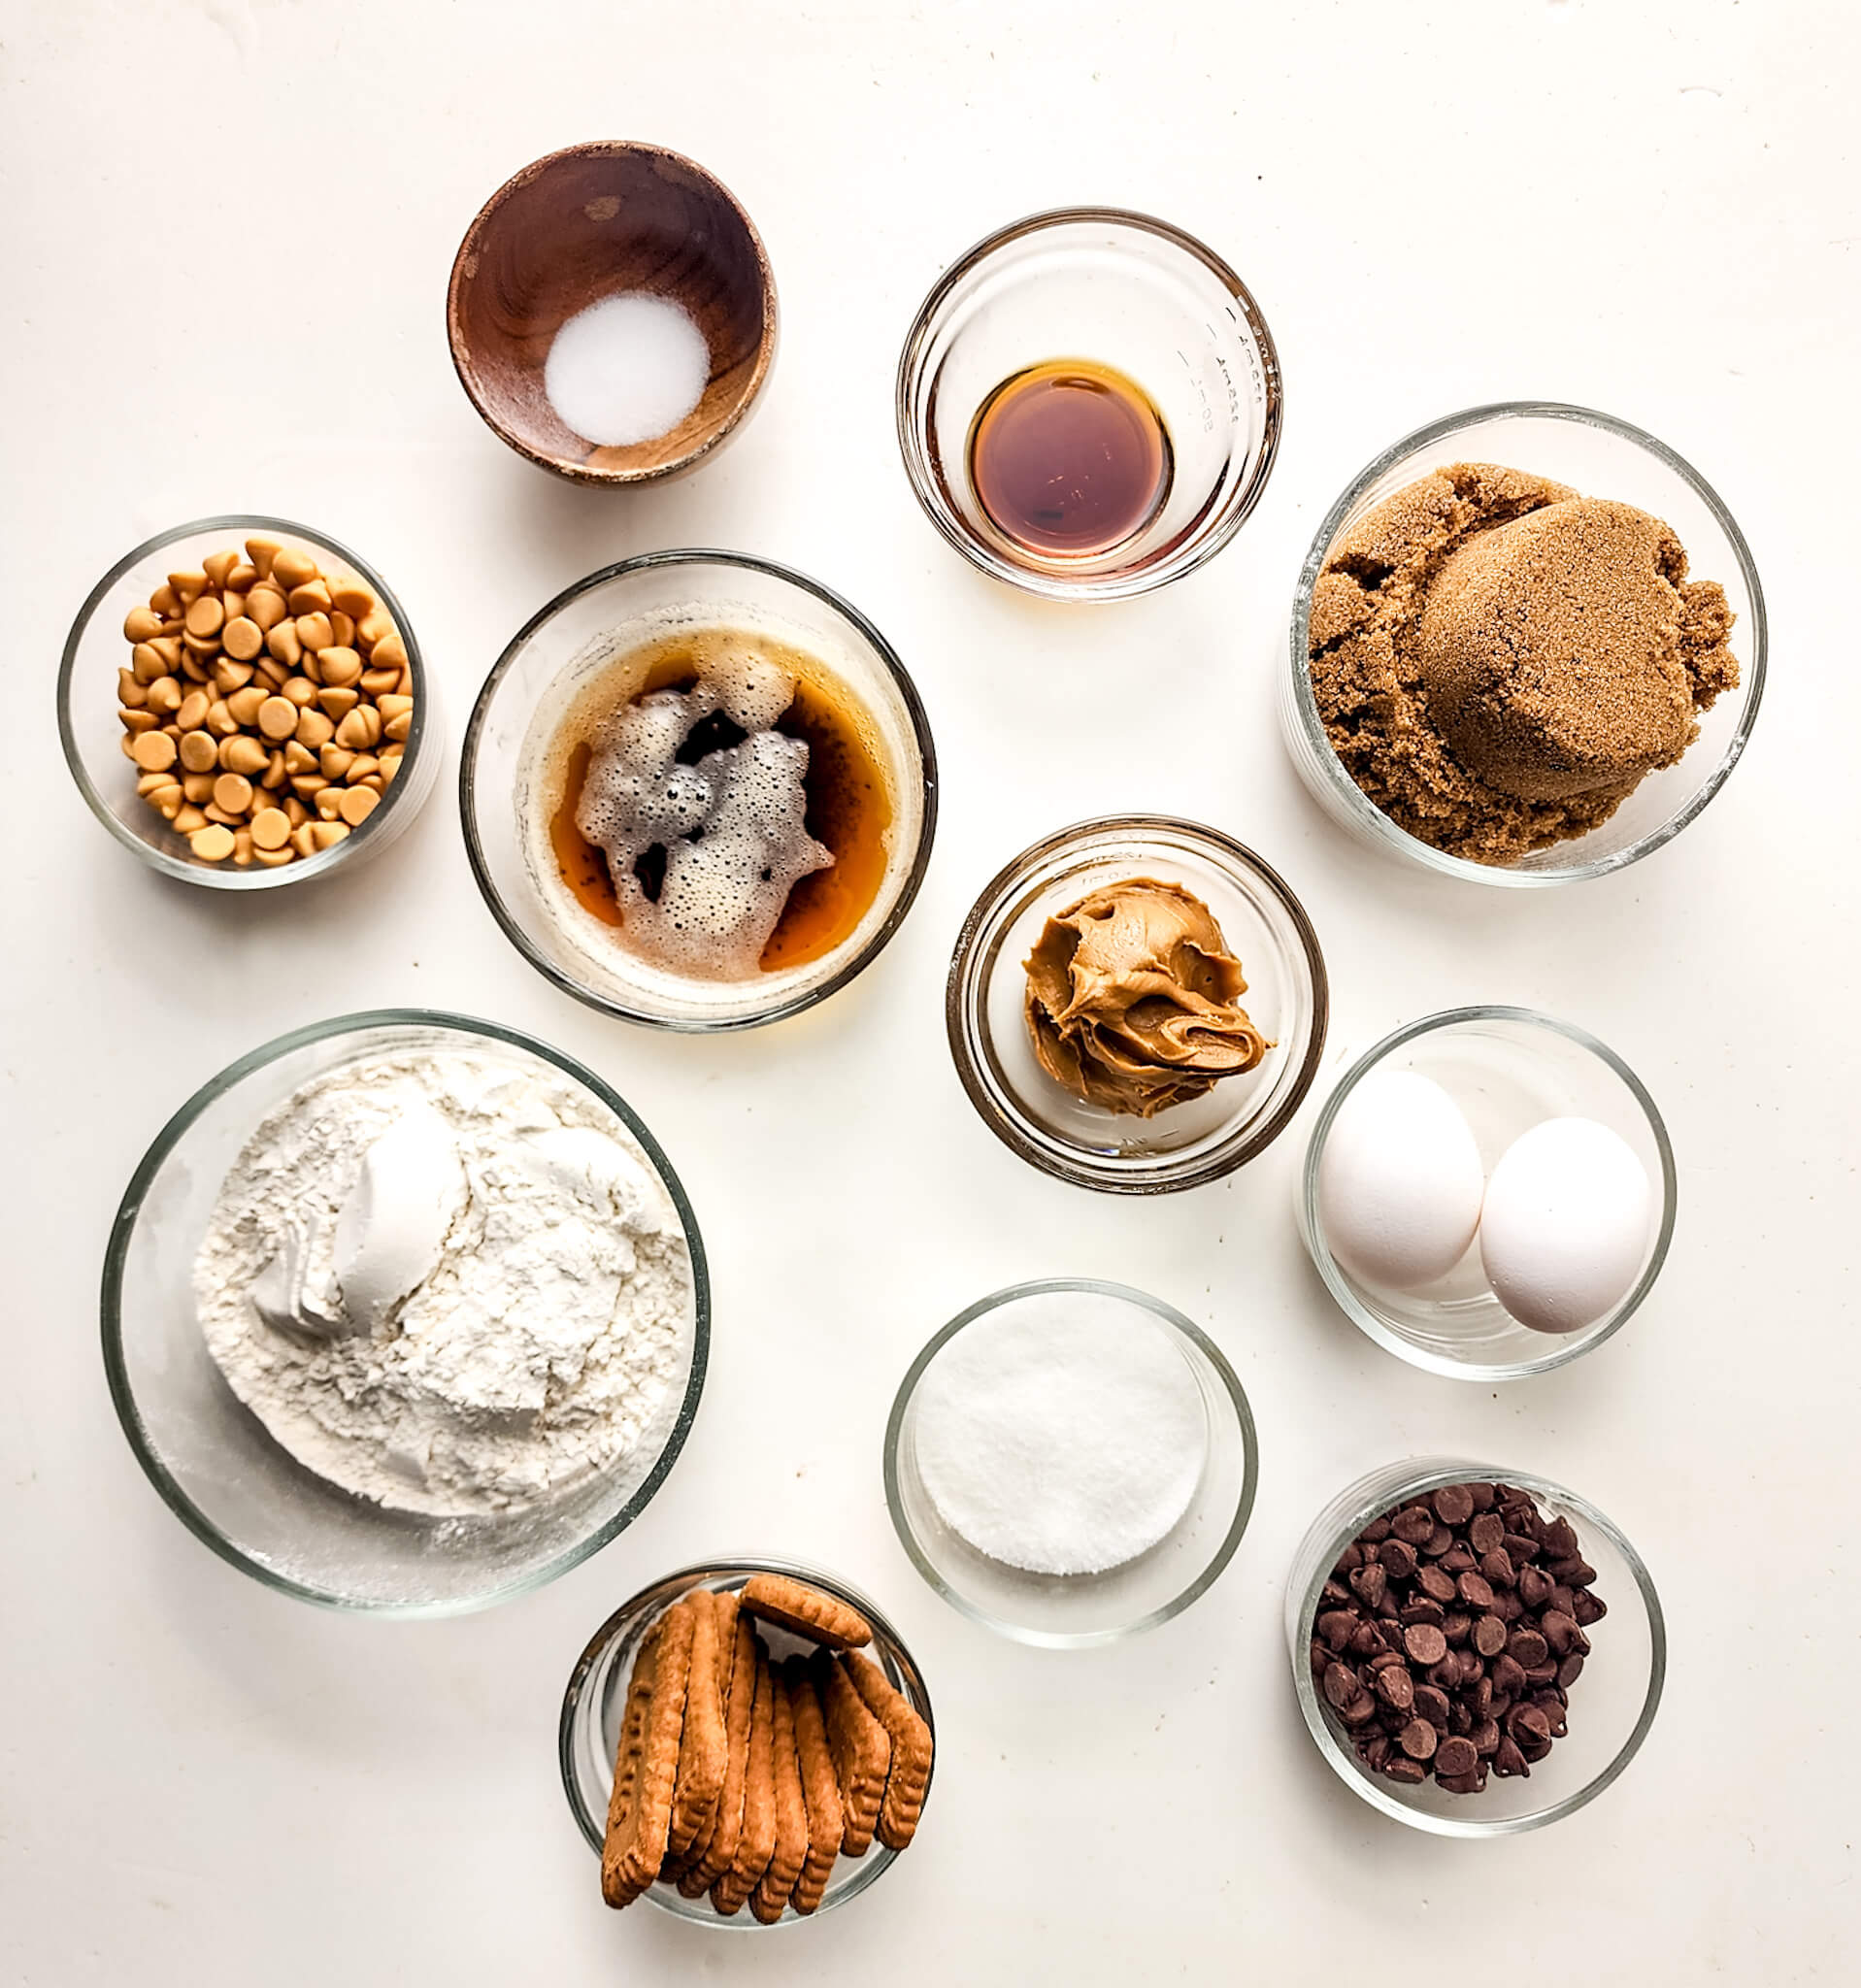 Various baking ingredients neatly arranged in clear bowls on a white surface, including flour, eggs, sugar, nuts, and Biscoff brownies.